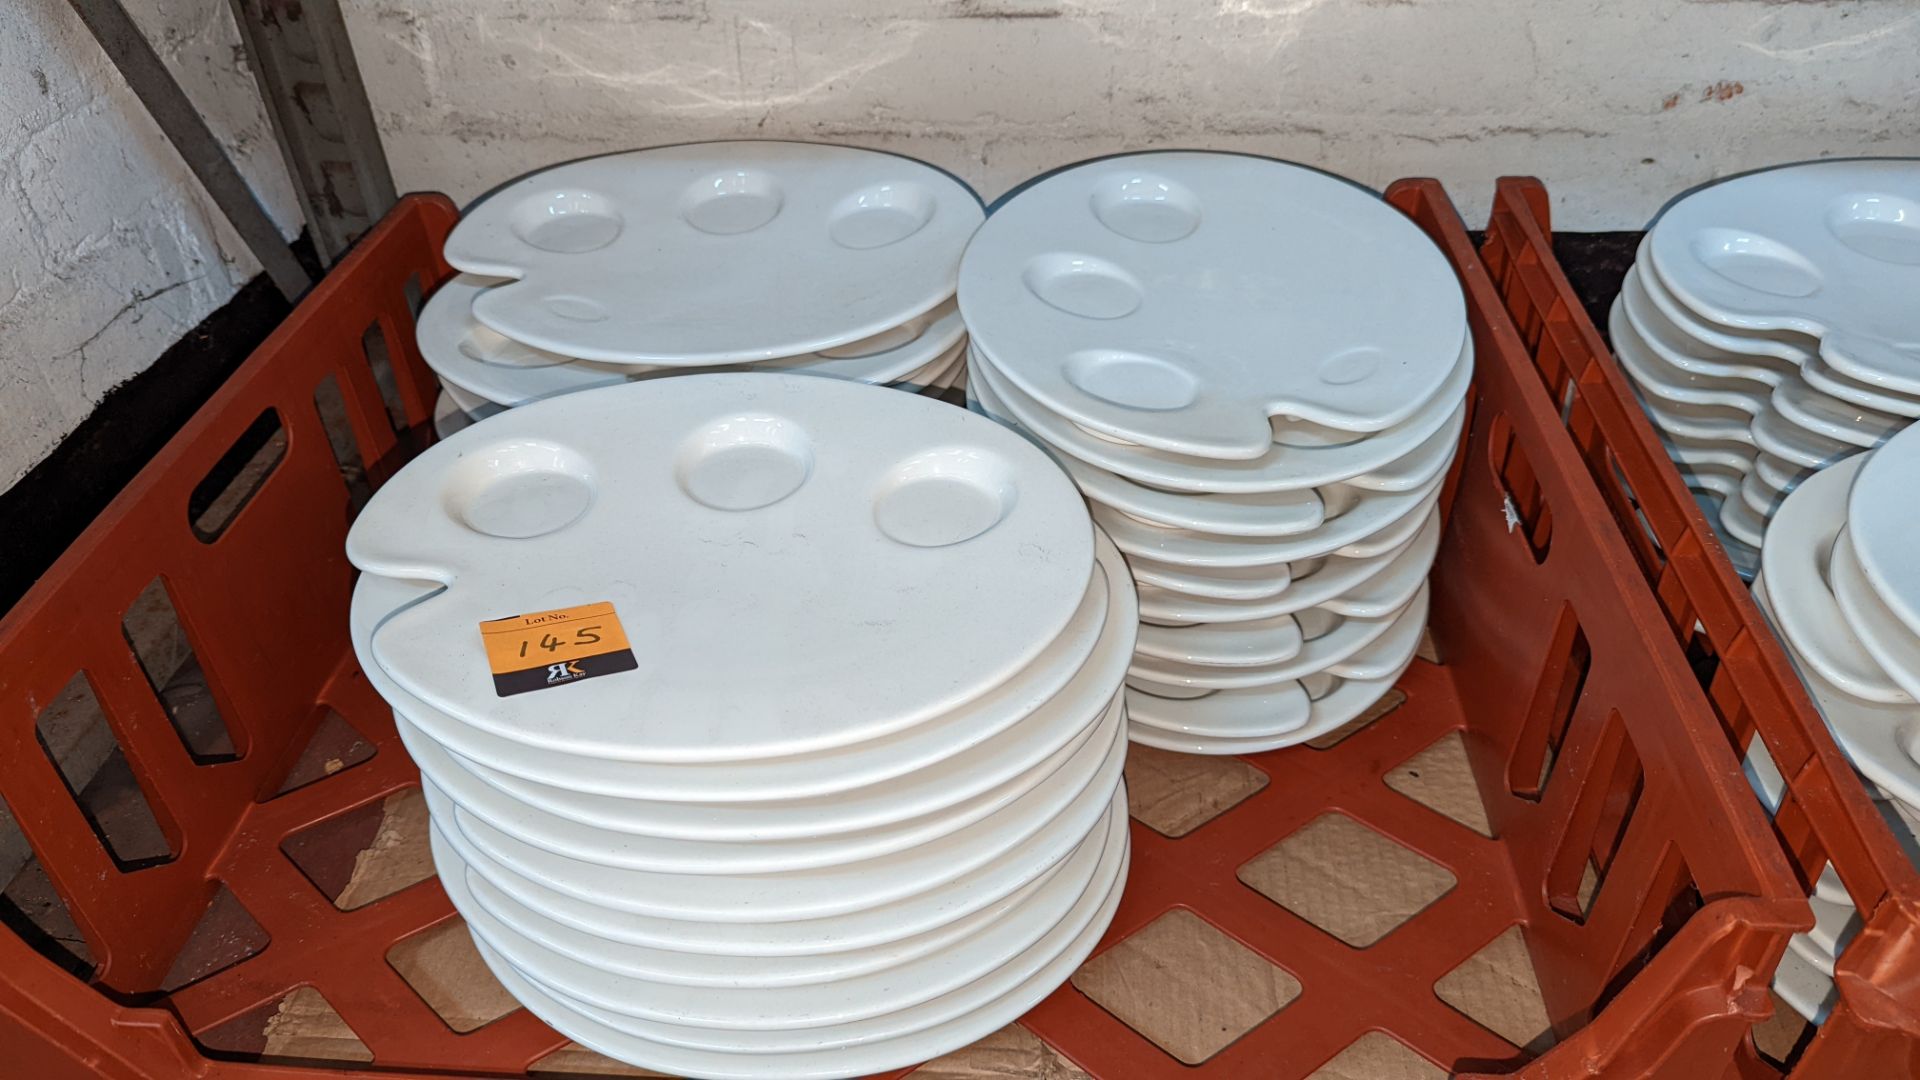 30 off Dudson artist's palette style plates/dishes, each measuring approximately 305mm x 250mm - Image 2 of 3